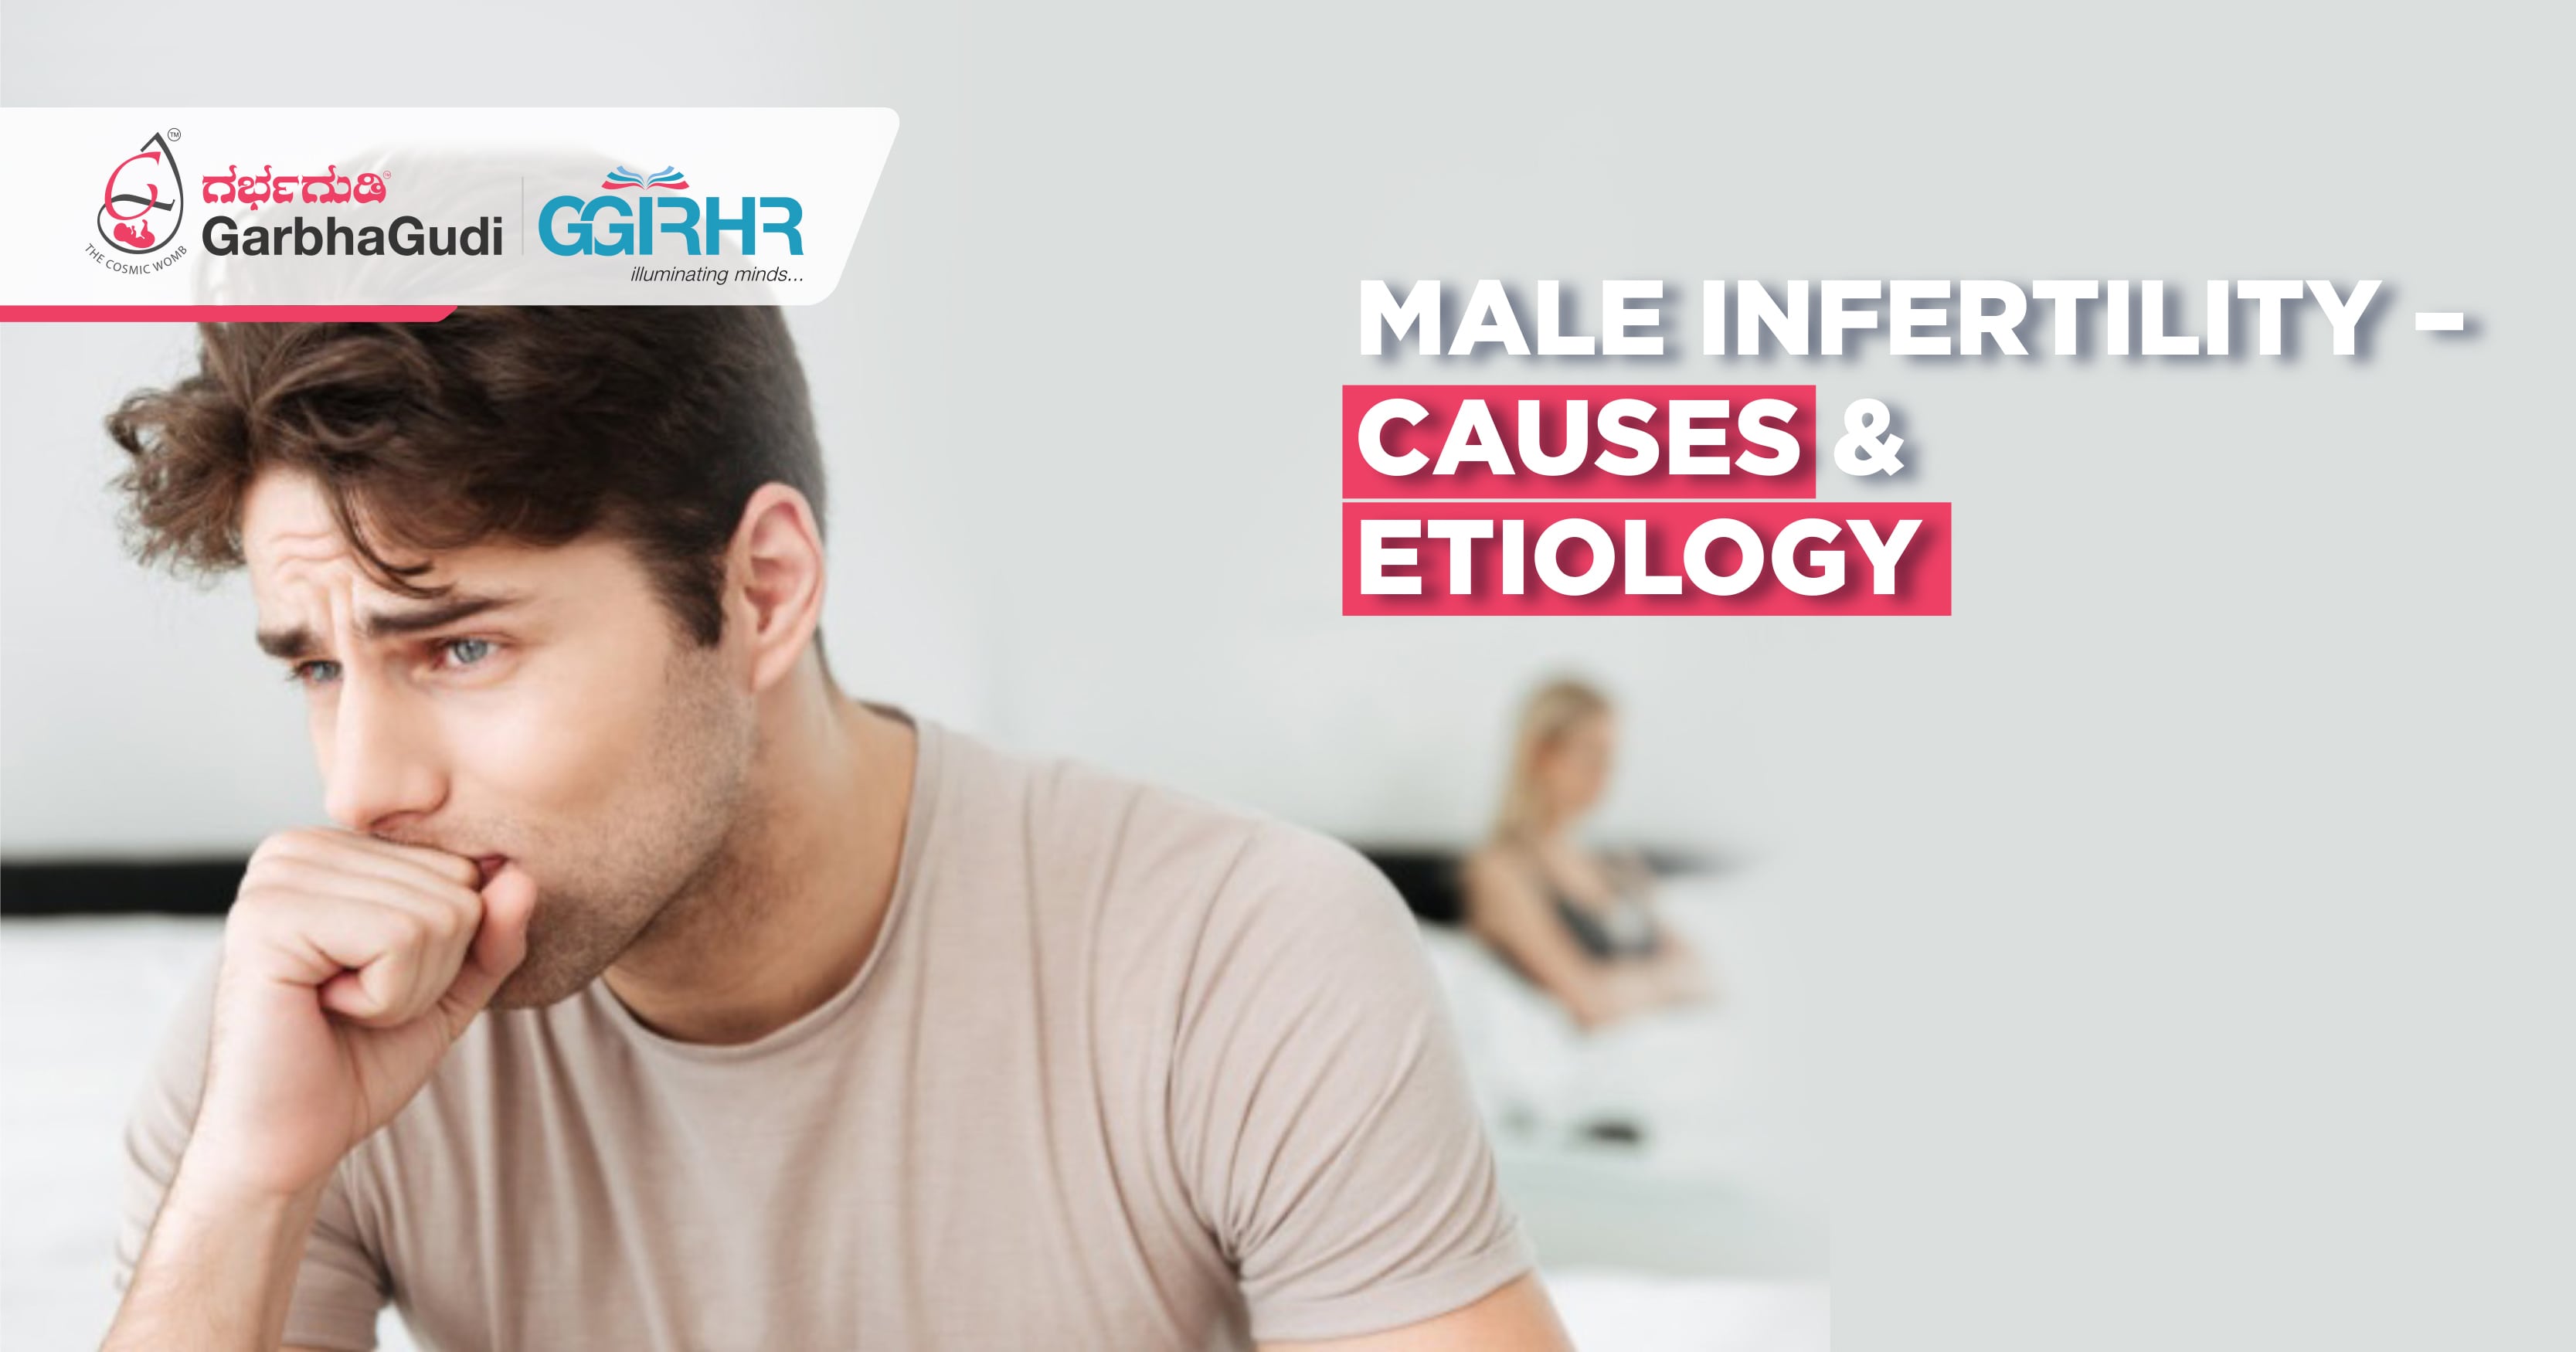 Male Infertility Causes & Aetiology